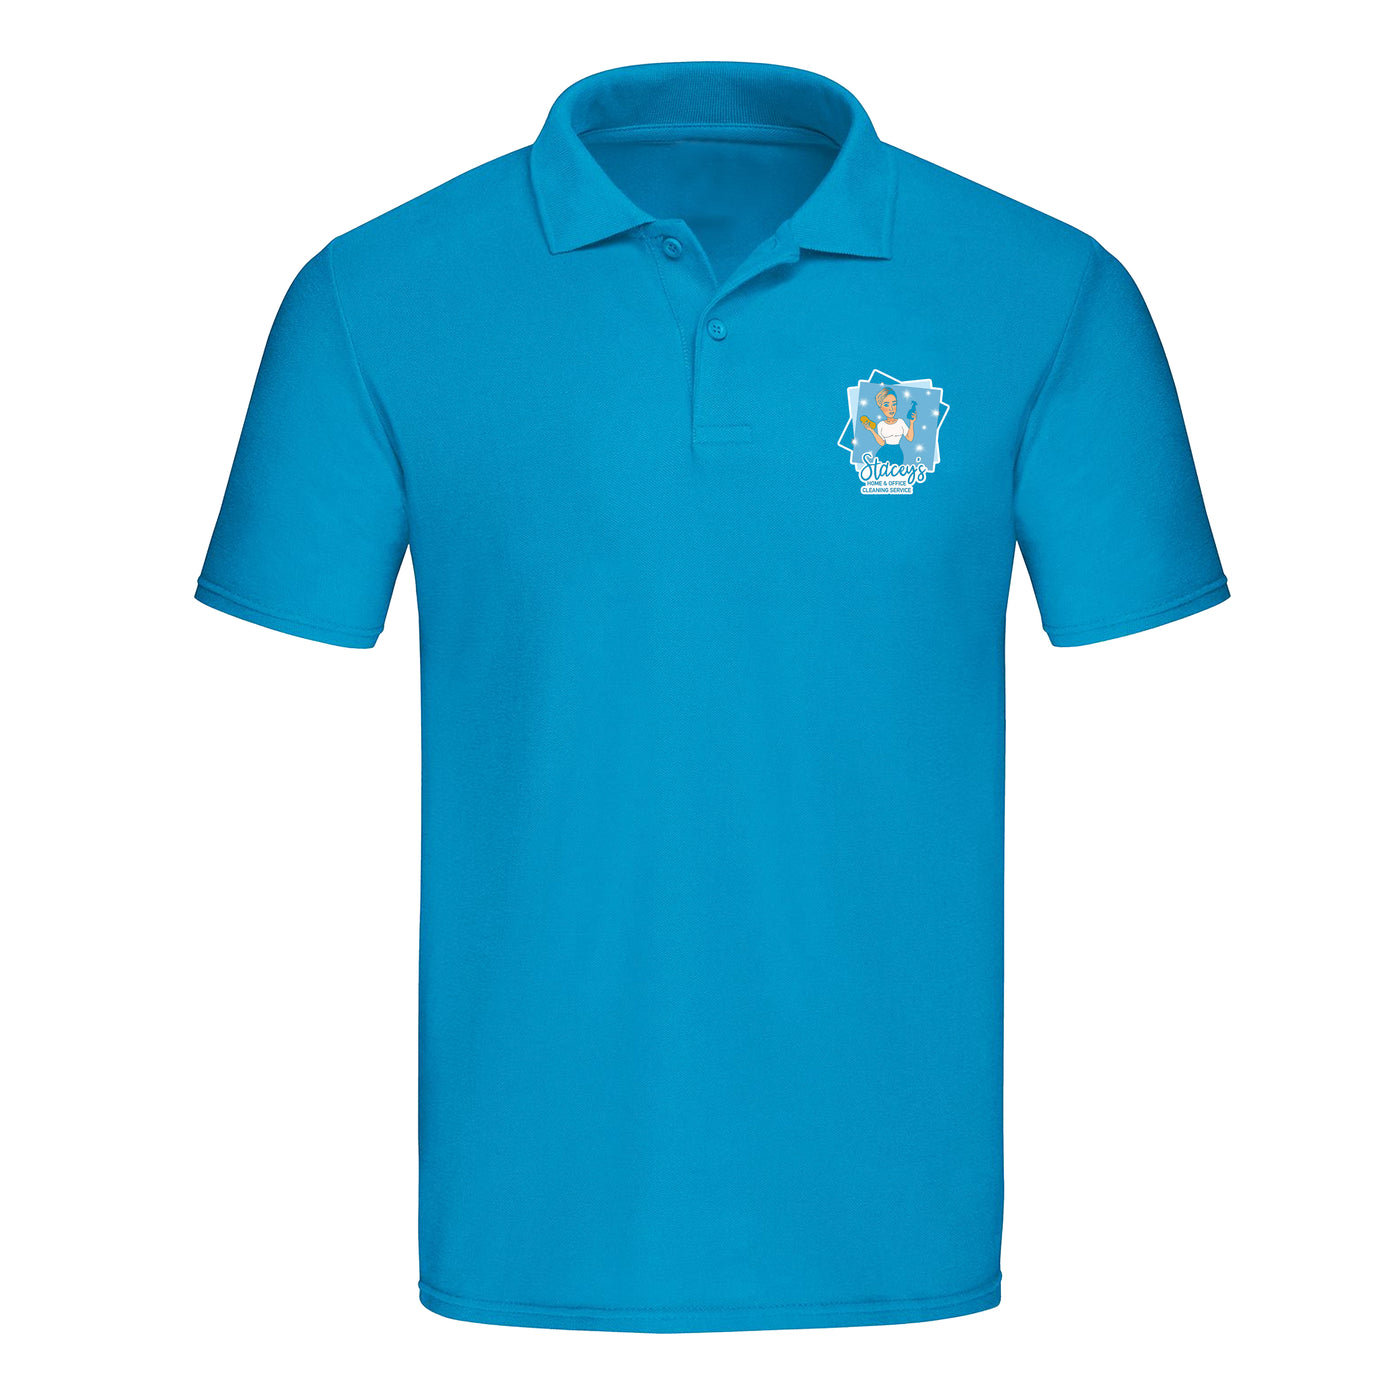 PERSONALISE UNISEX ADULT POLO - ADD IMAGE AND TEXT